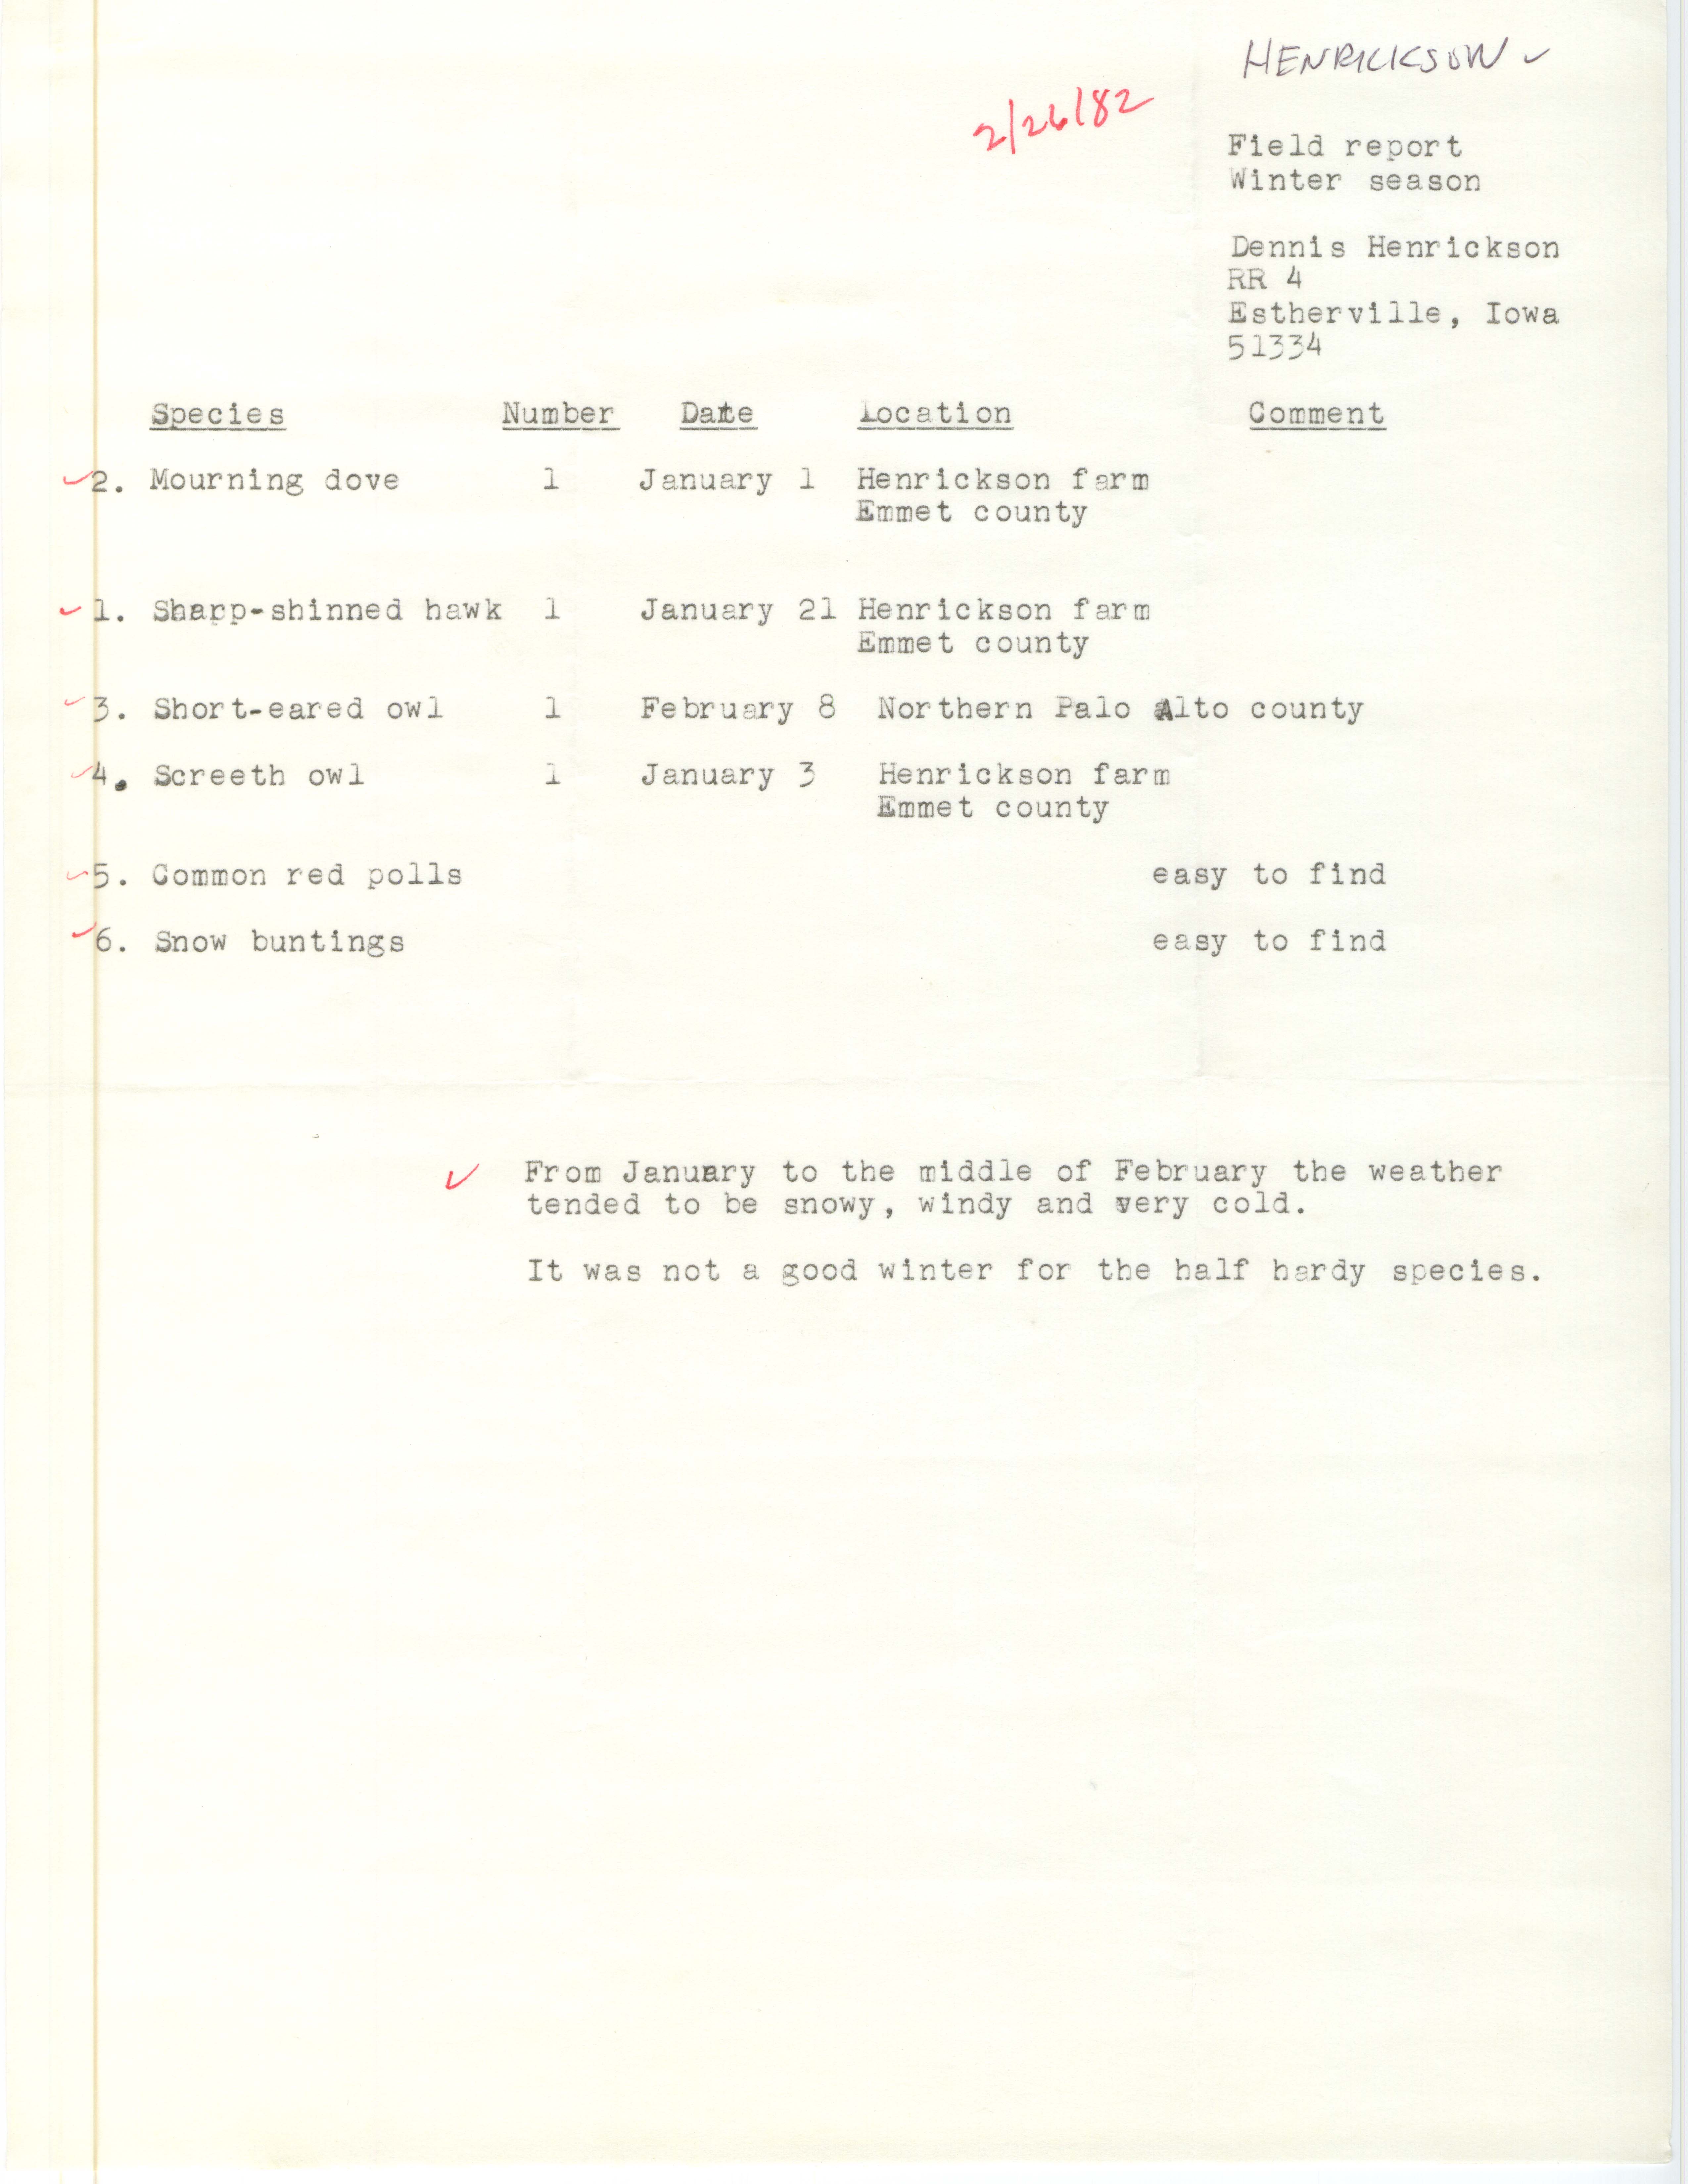 Field notes contributed by Dennis Henrickson, February 26, 1982